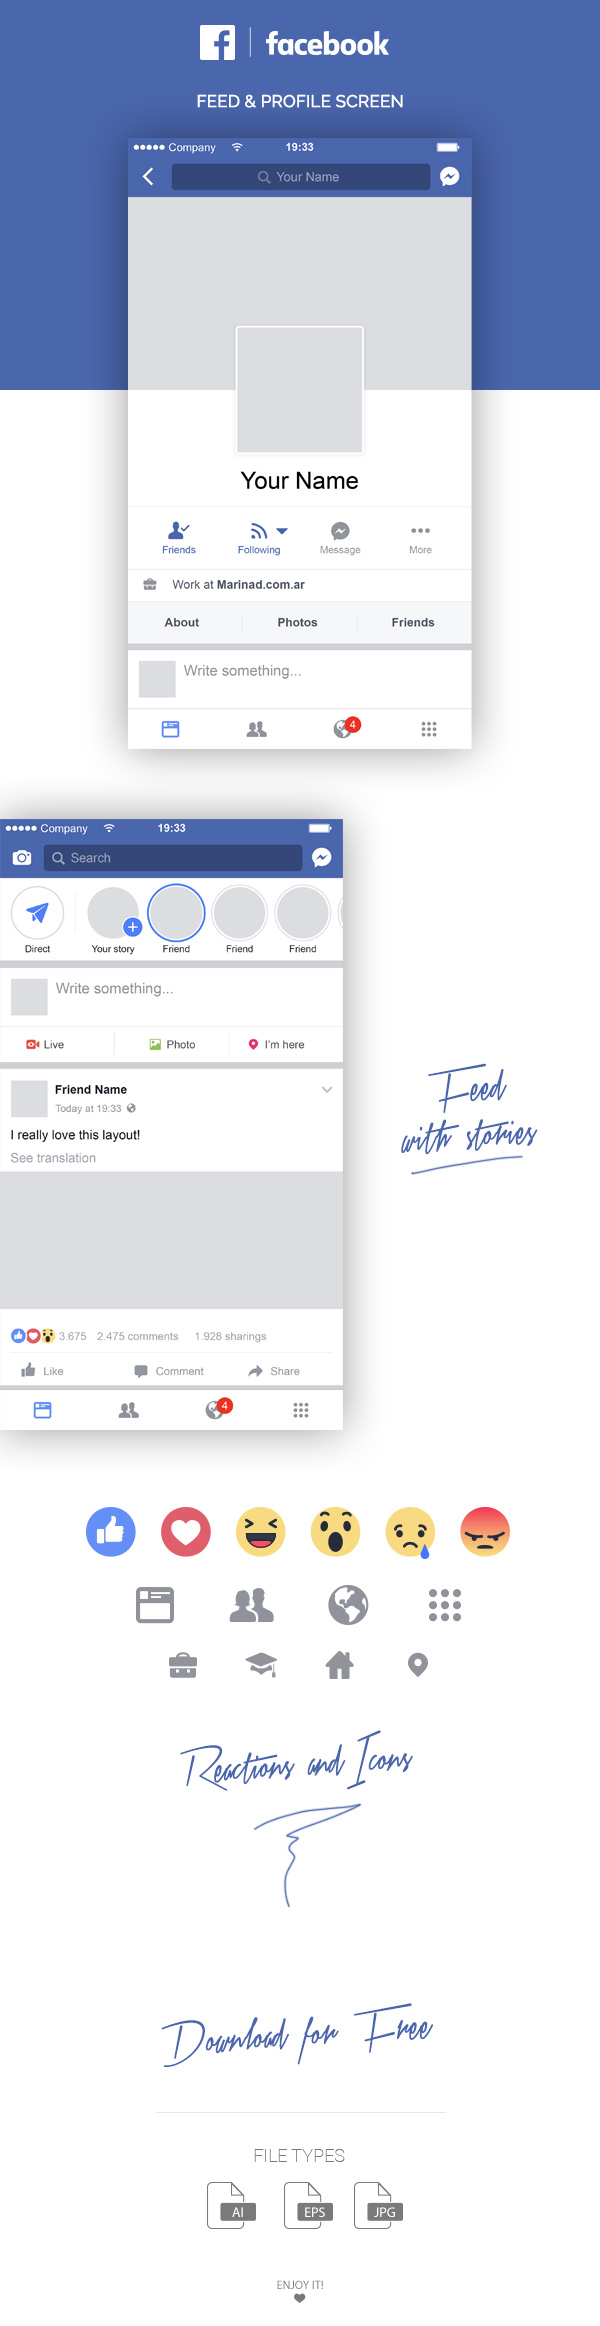 facebook layout vector free